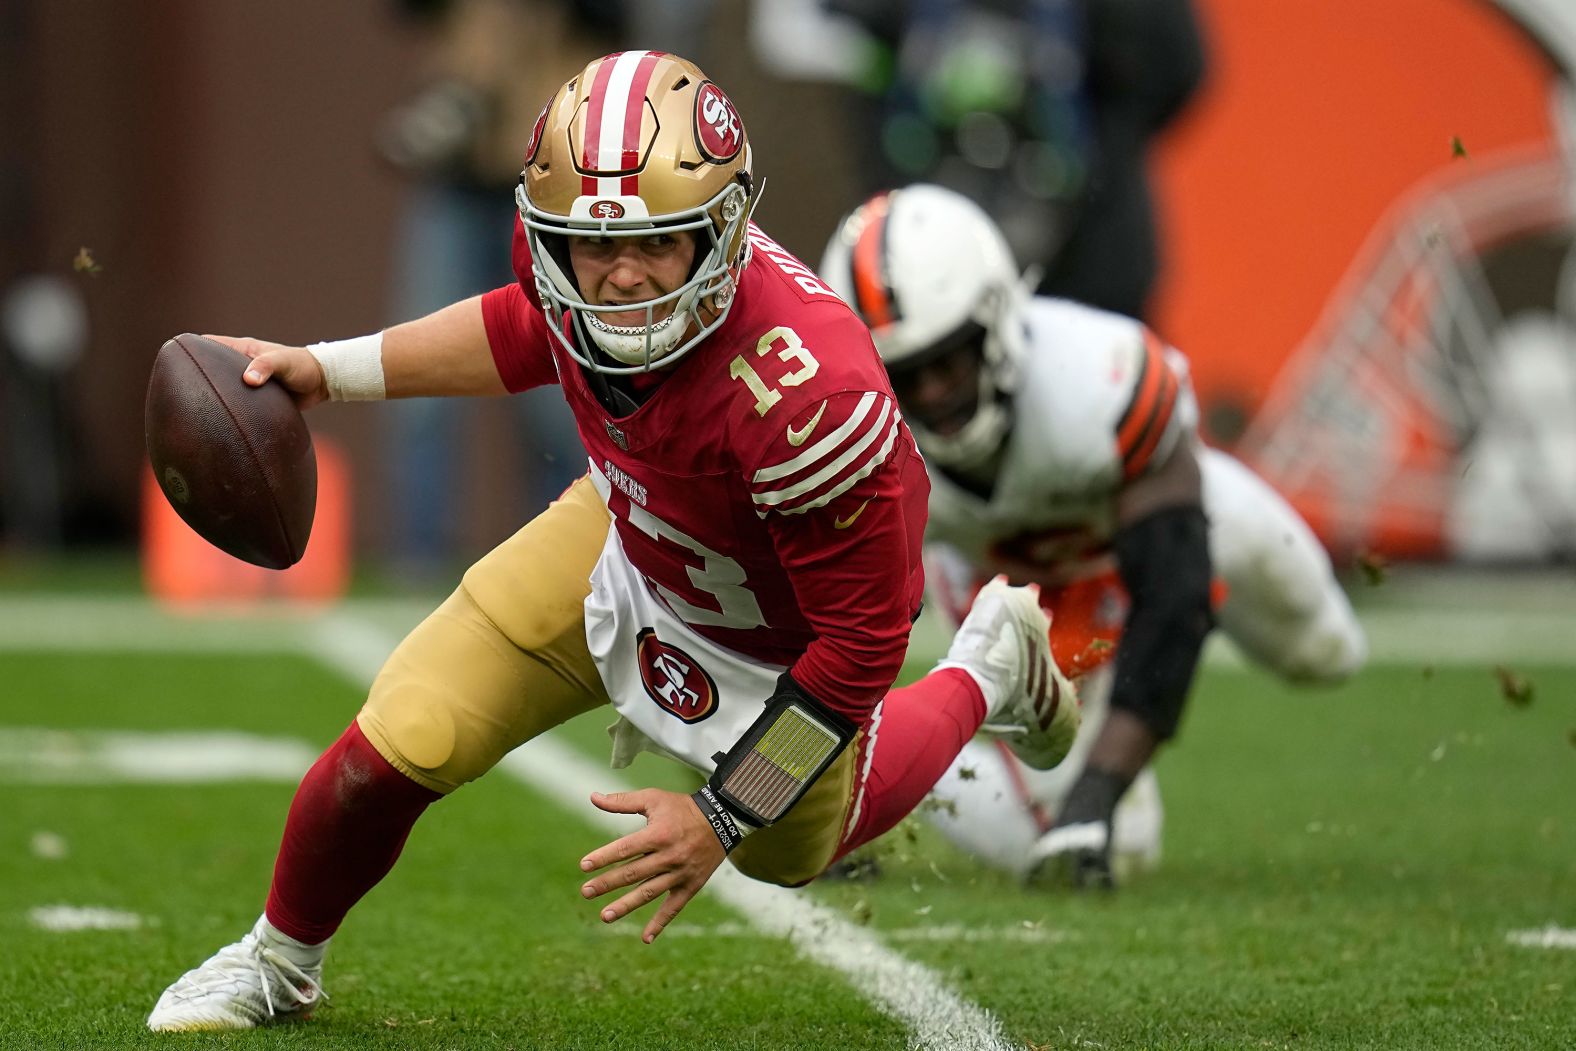 San Francisco 49ers quarterback Brock Purdy scrambles away from Cleveland Browns linebacker Jeremiah Owusu-Koramoah during the second half of the 49ers' 19-17 loss on Sunday, October 15.